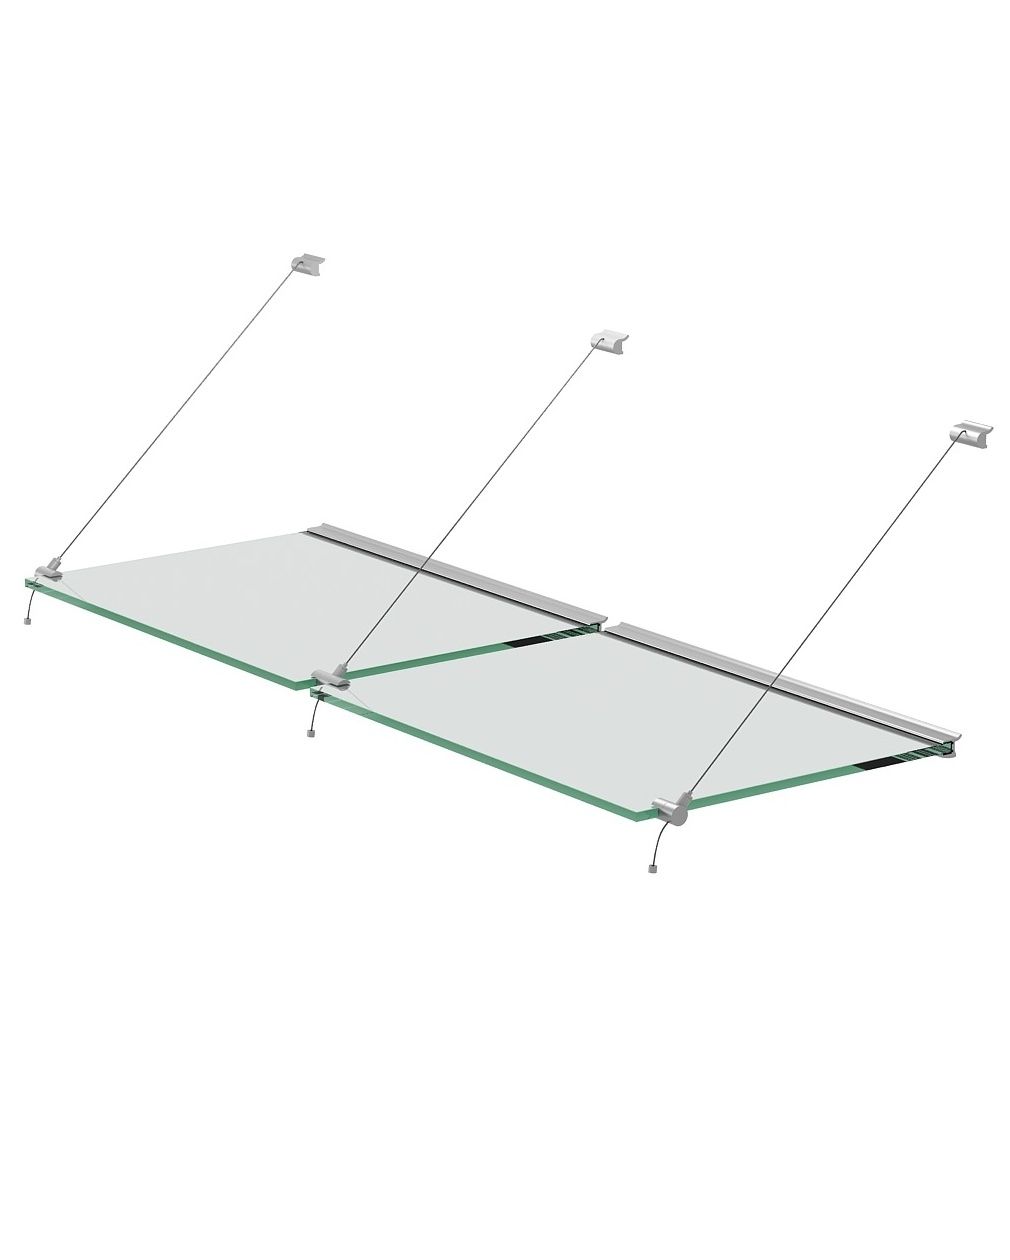 Suspended Glass Shelving Systems Design Modern Shelf Storage And With Wire Suspended Glass Shelves (View 5 of 15)